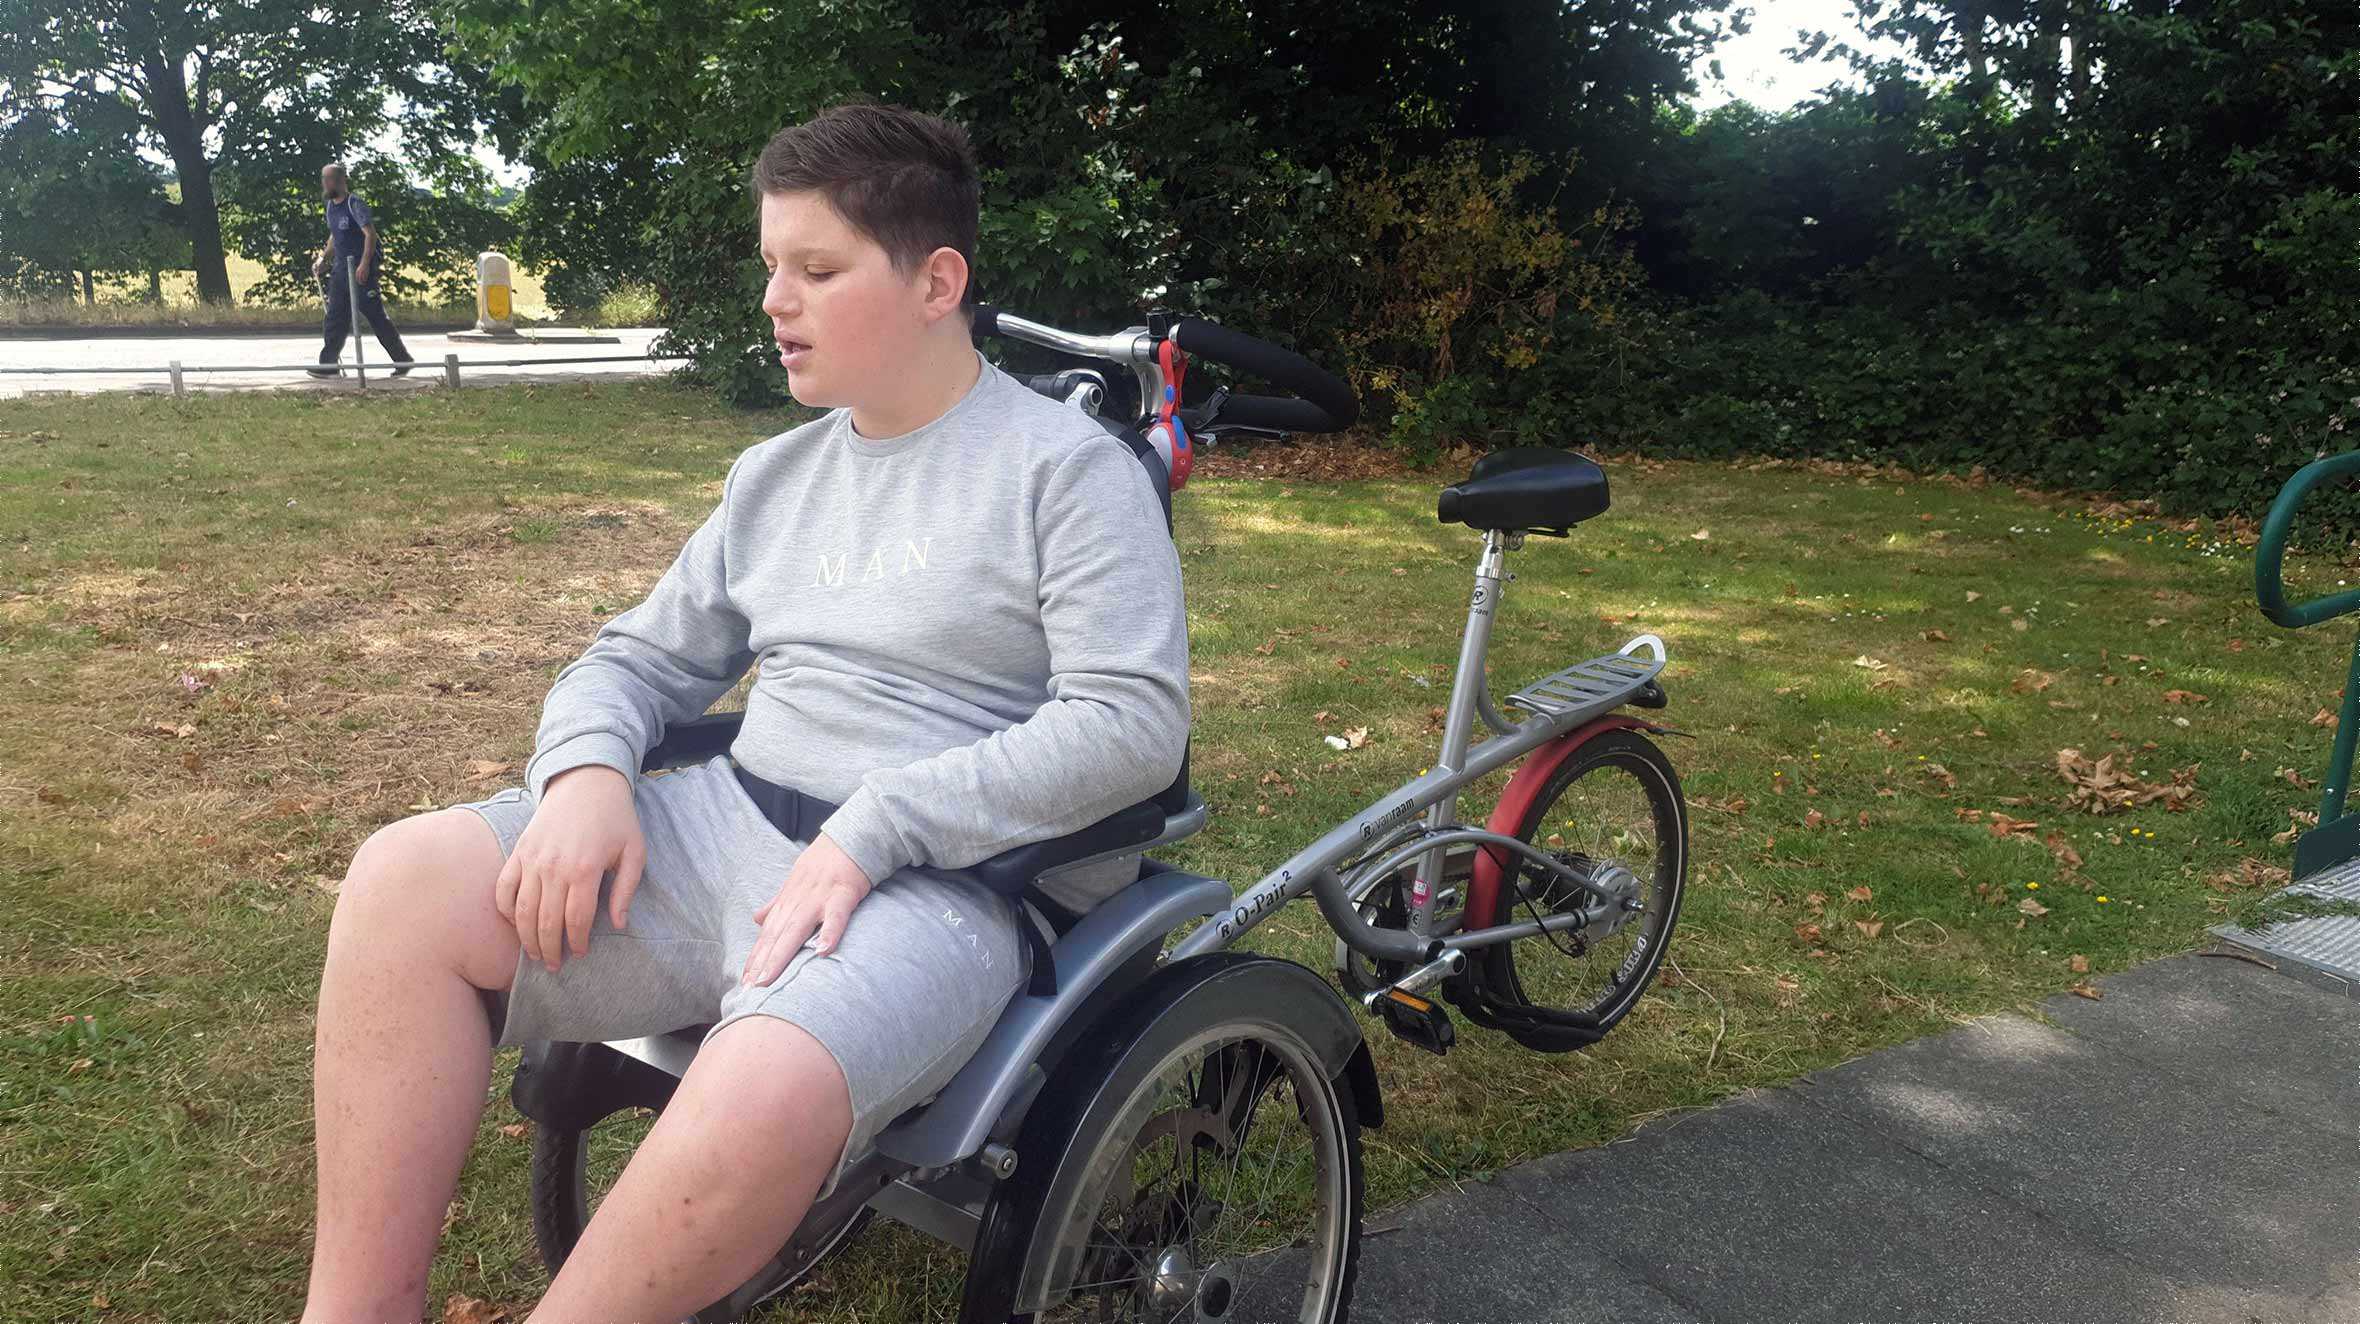 Eric sitting on his adapted bike in a London park.